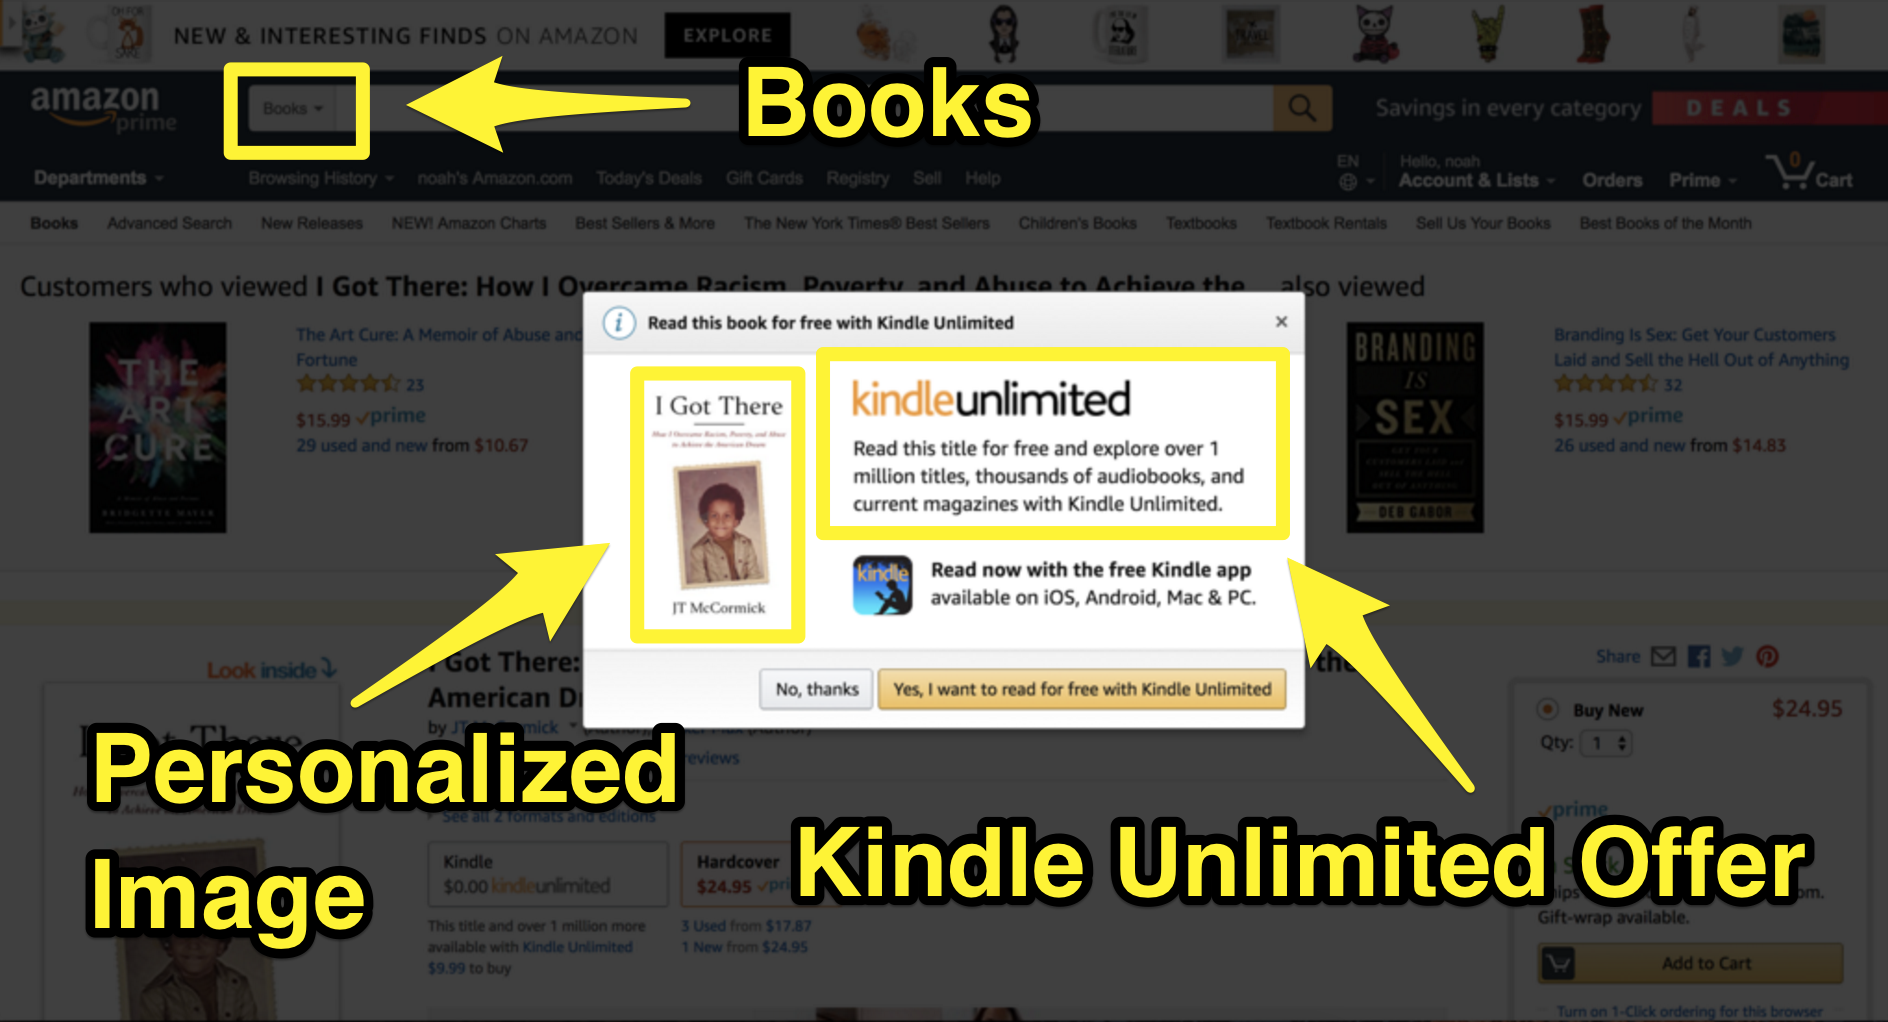 When you view a book with a Kindle version you ll immediately see a popup Amazon can do this using “Visibility Rules” so the popup only shows on book